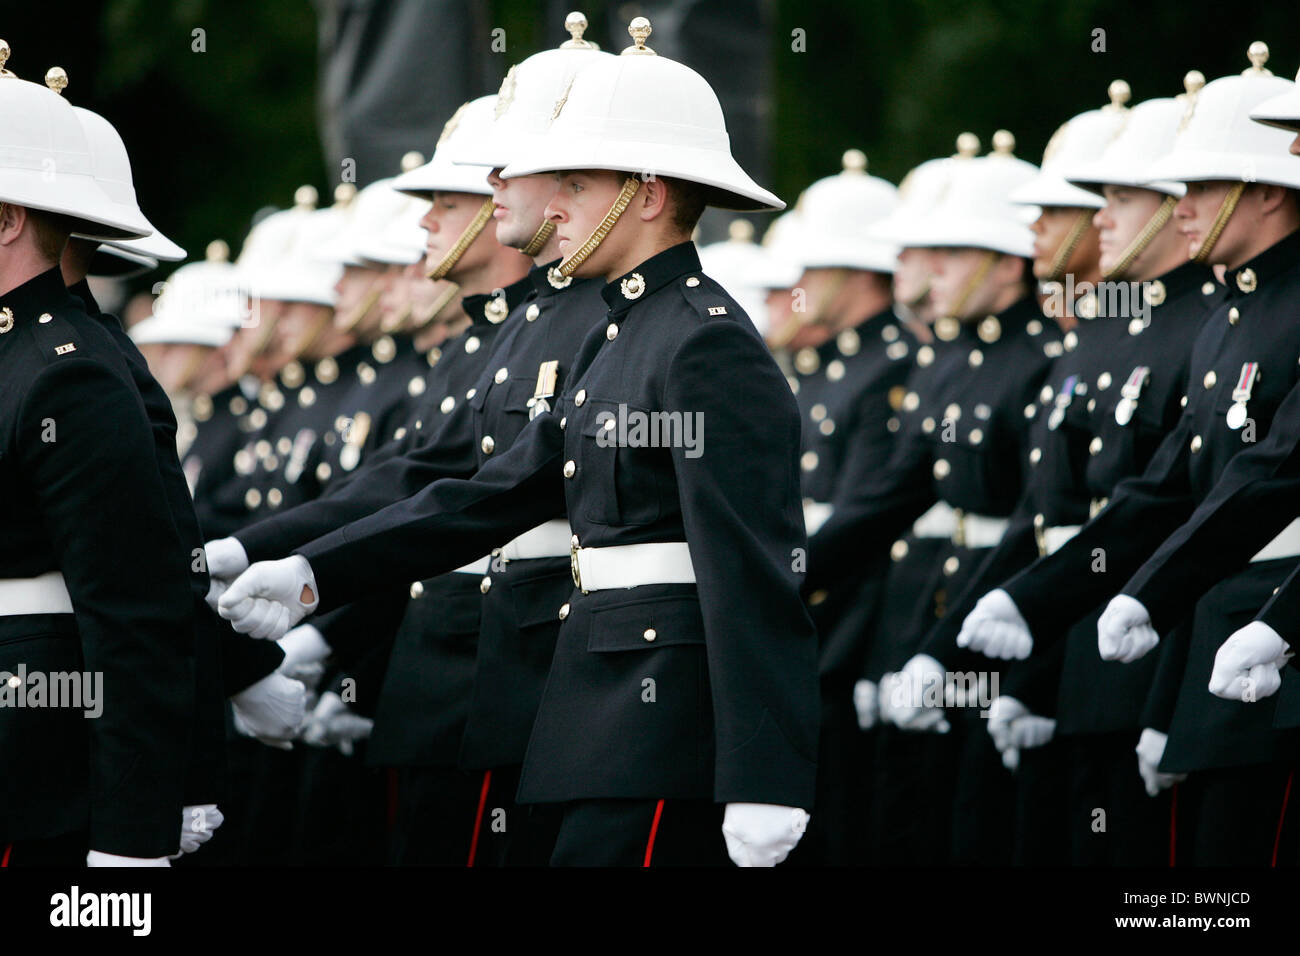 Members of the Royal Marines march at the Falklands Veterans Parade in London Stock Photo